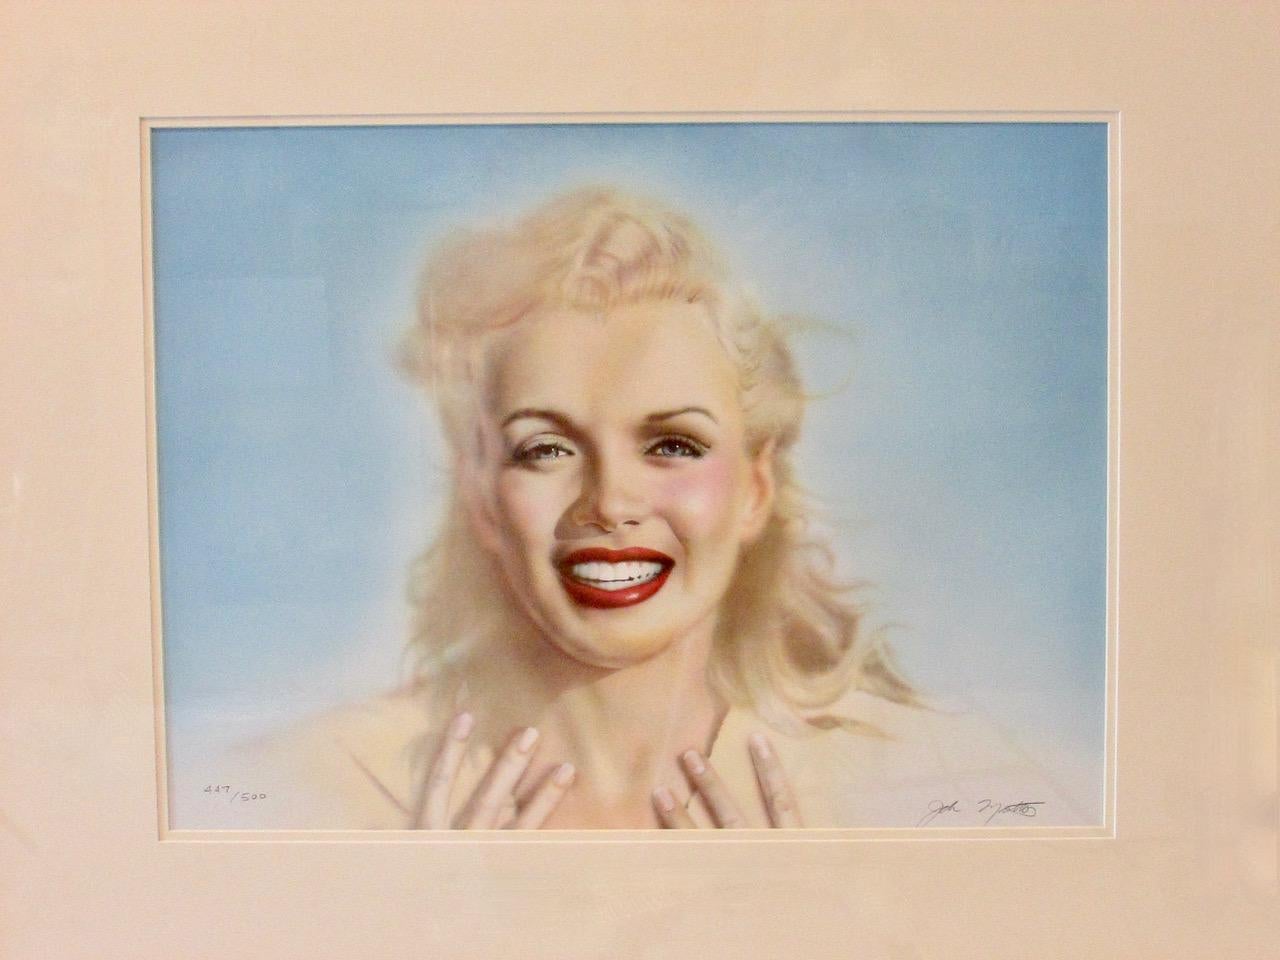 20th Century Marilyn Monroe Offset Lithograph Print, Limited Edition by John Mattos For Sale